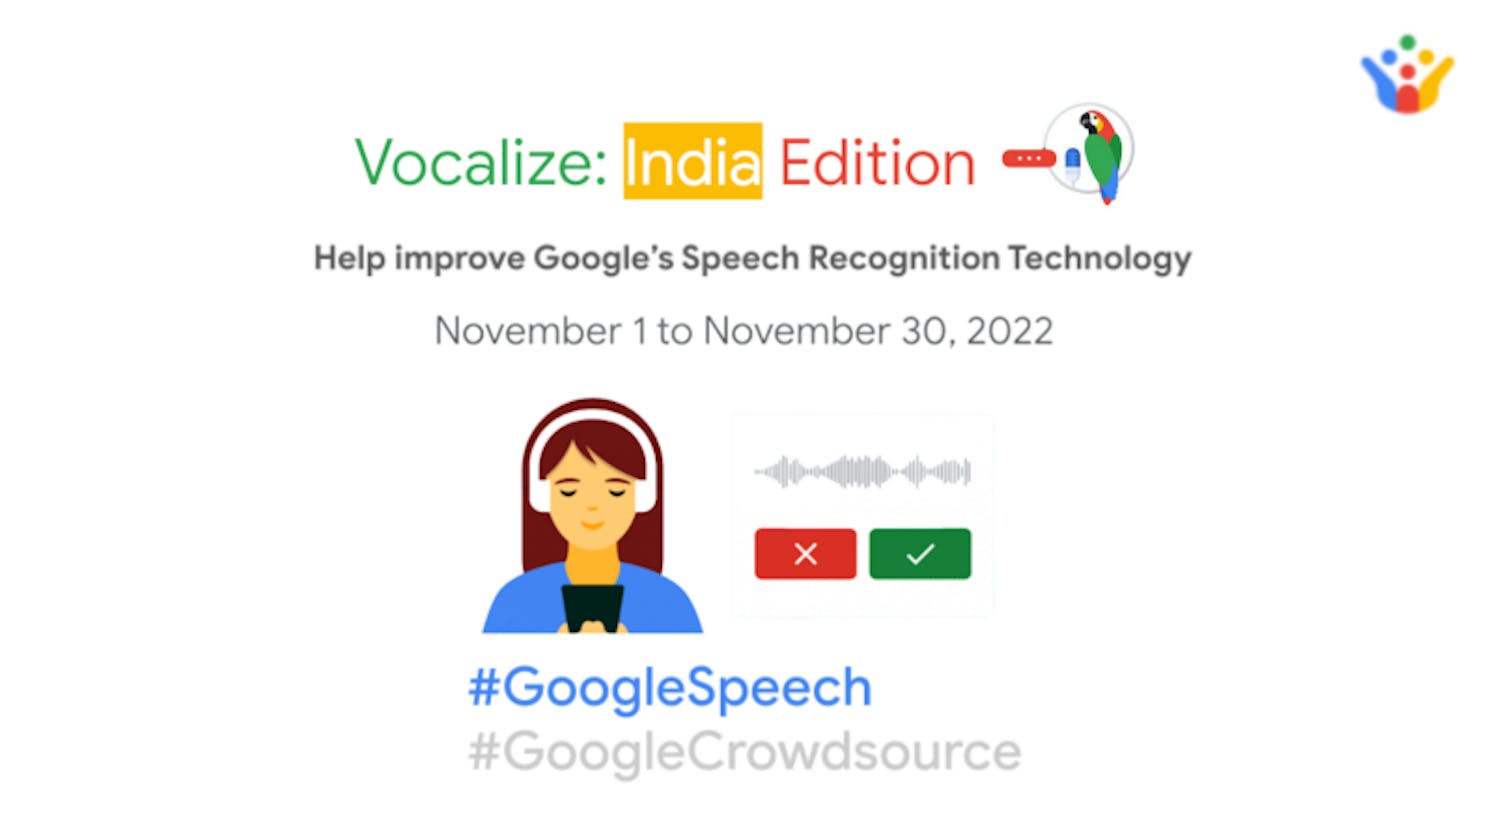 Vocalize: Indian languages Campaign! by Google Crowdsource